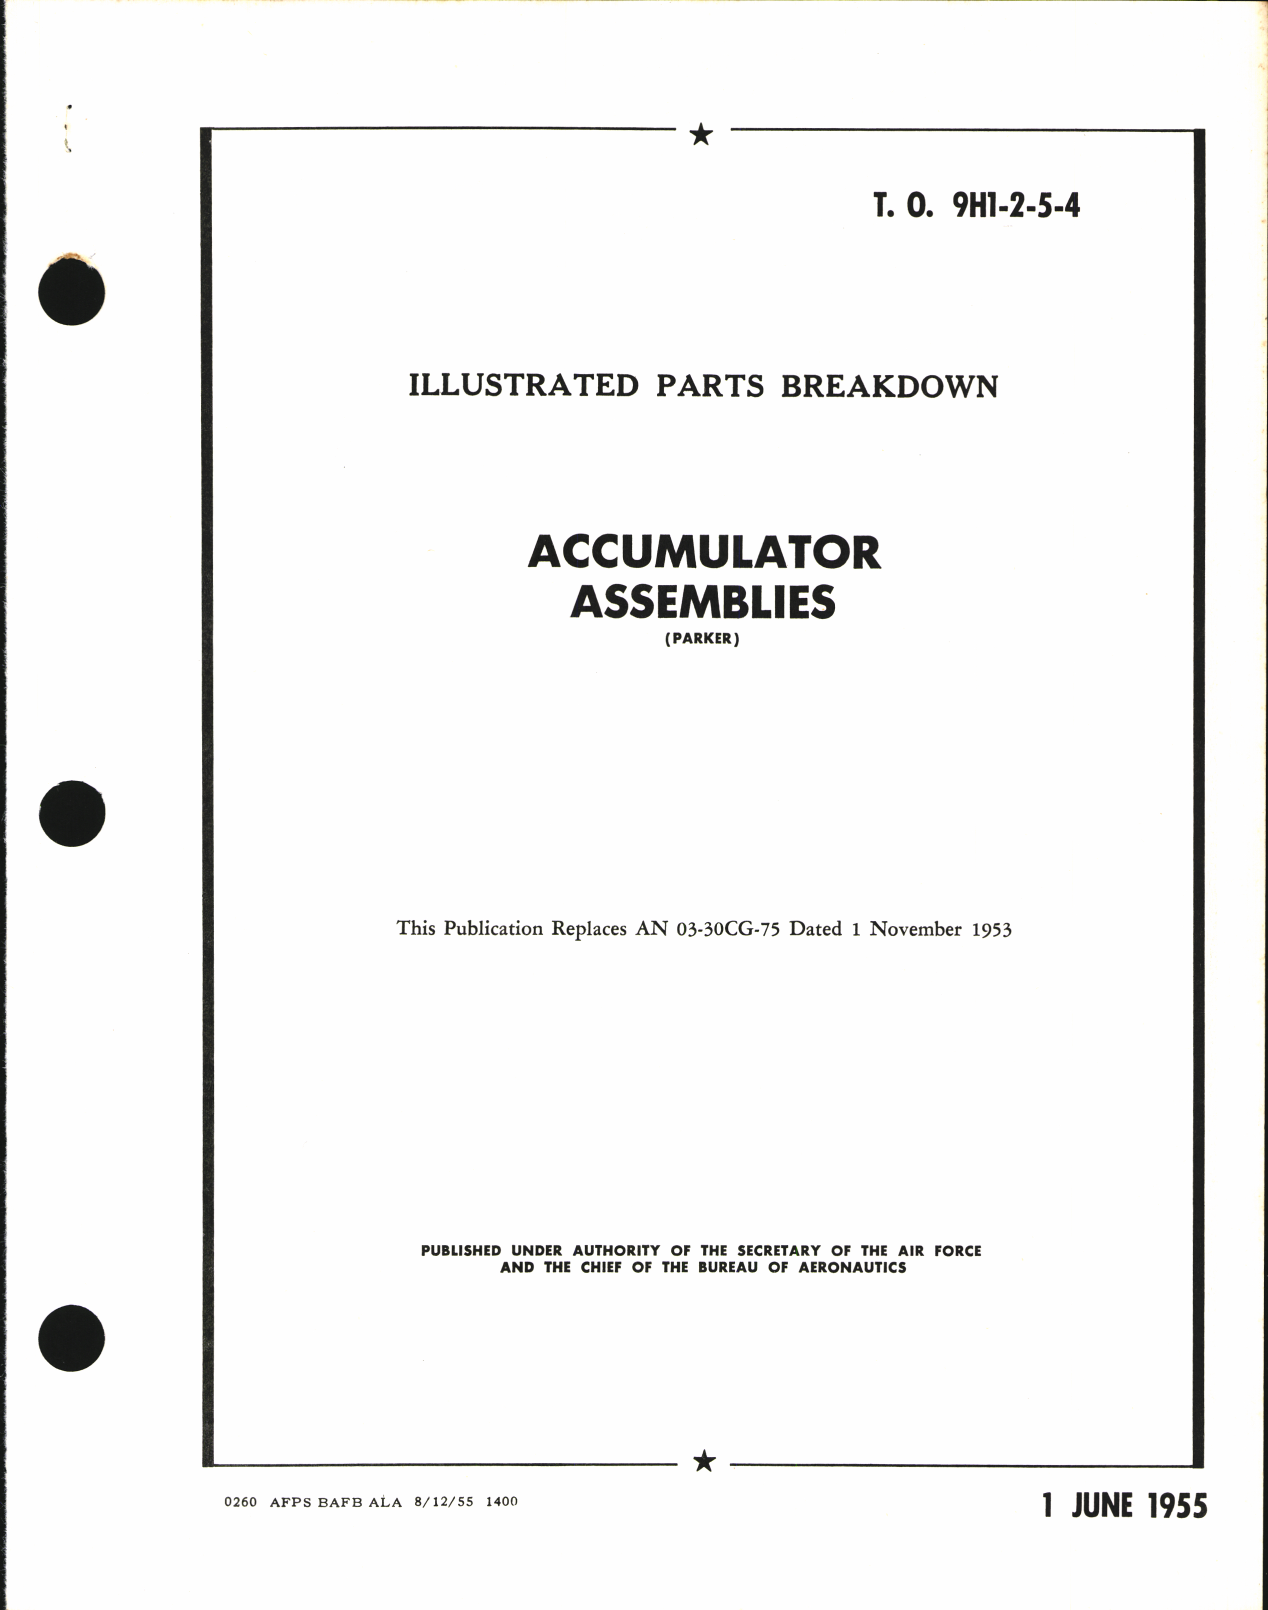 Sample page 1 from AirCorps Library document: Illustrated Parts Breakdown for Accumulator Assemblies